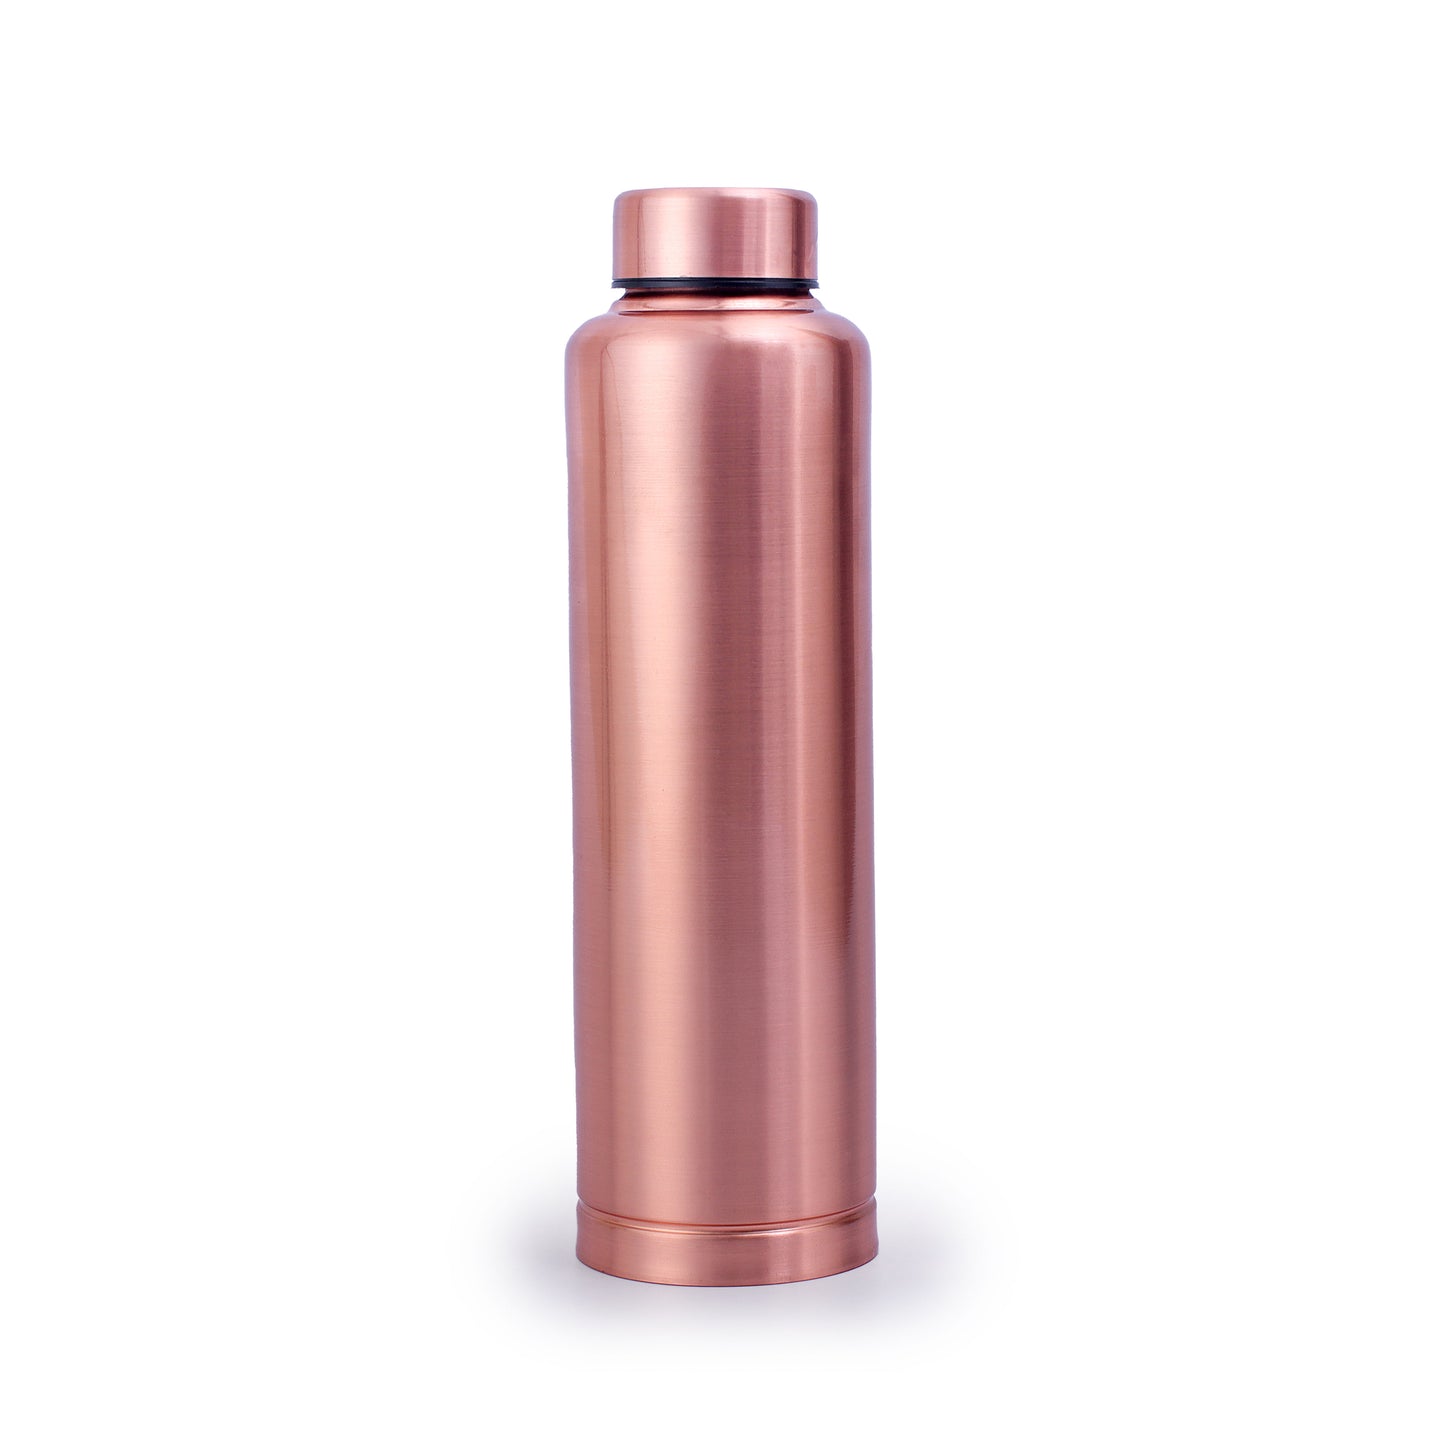 Basket Bum Heritage: Embrace Wellness in Style with our Pure Copper Heavy Quality Bottle